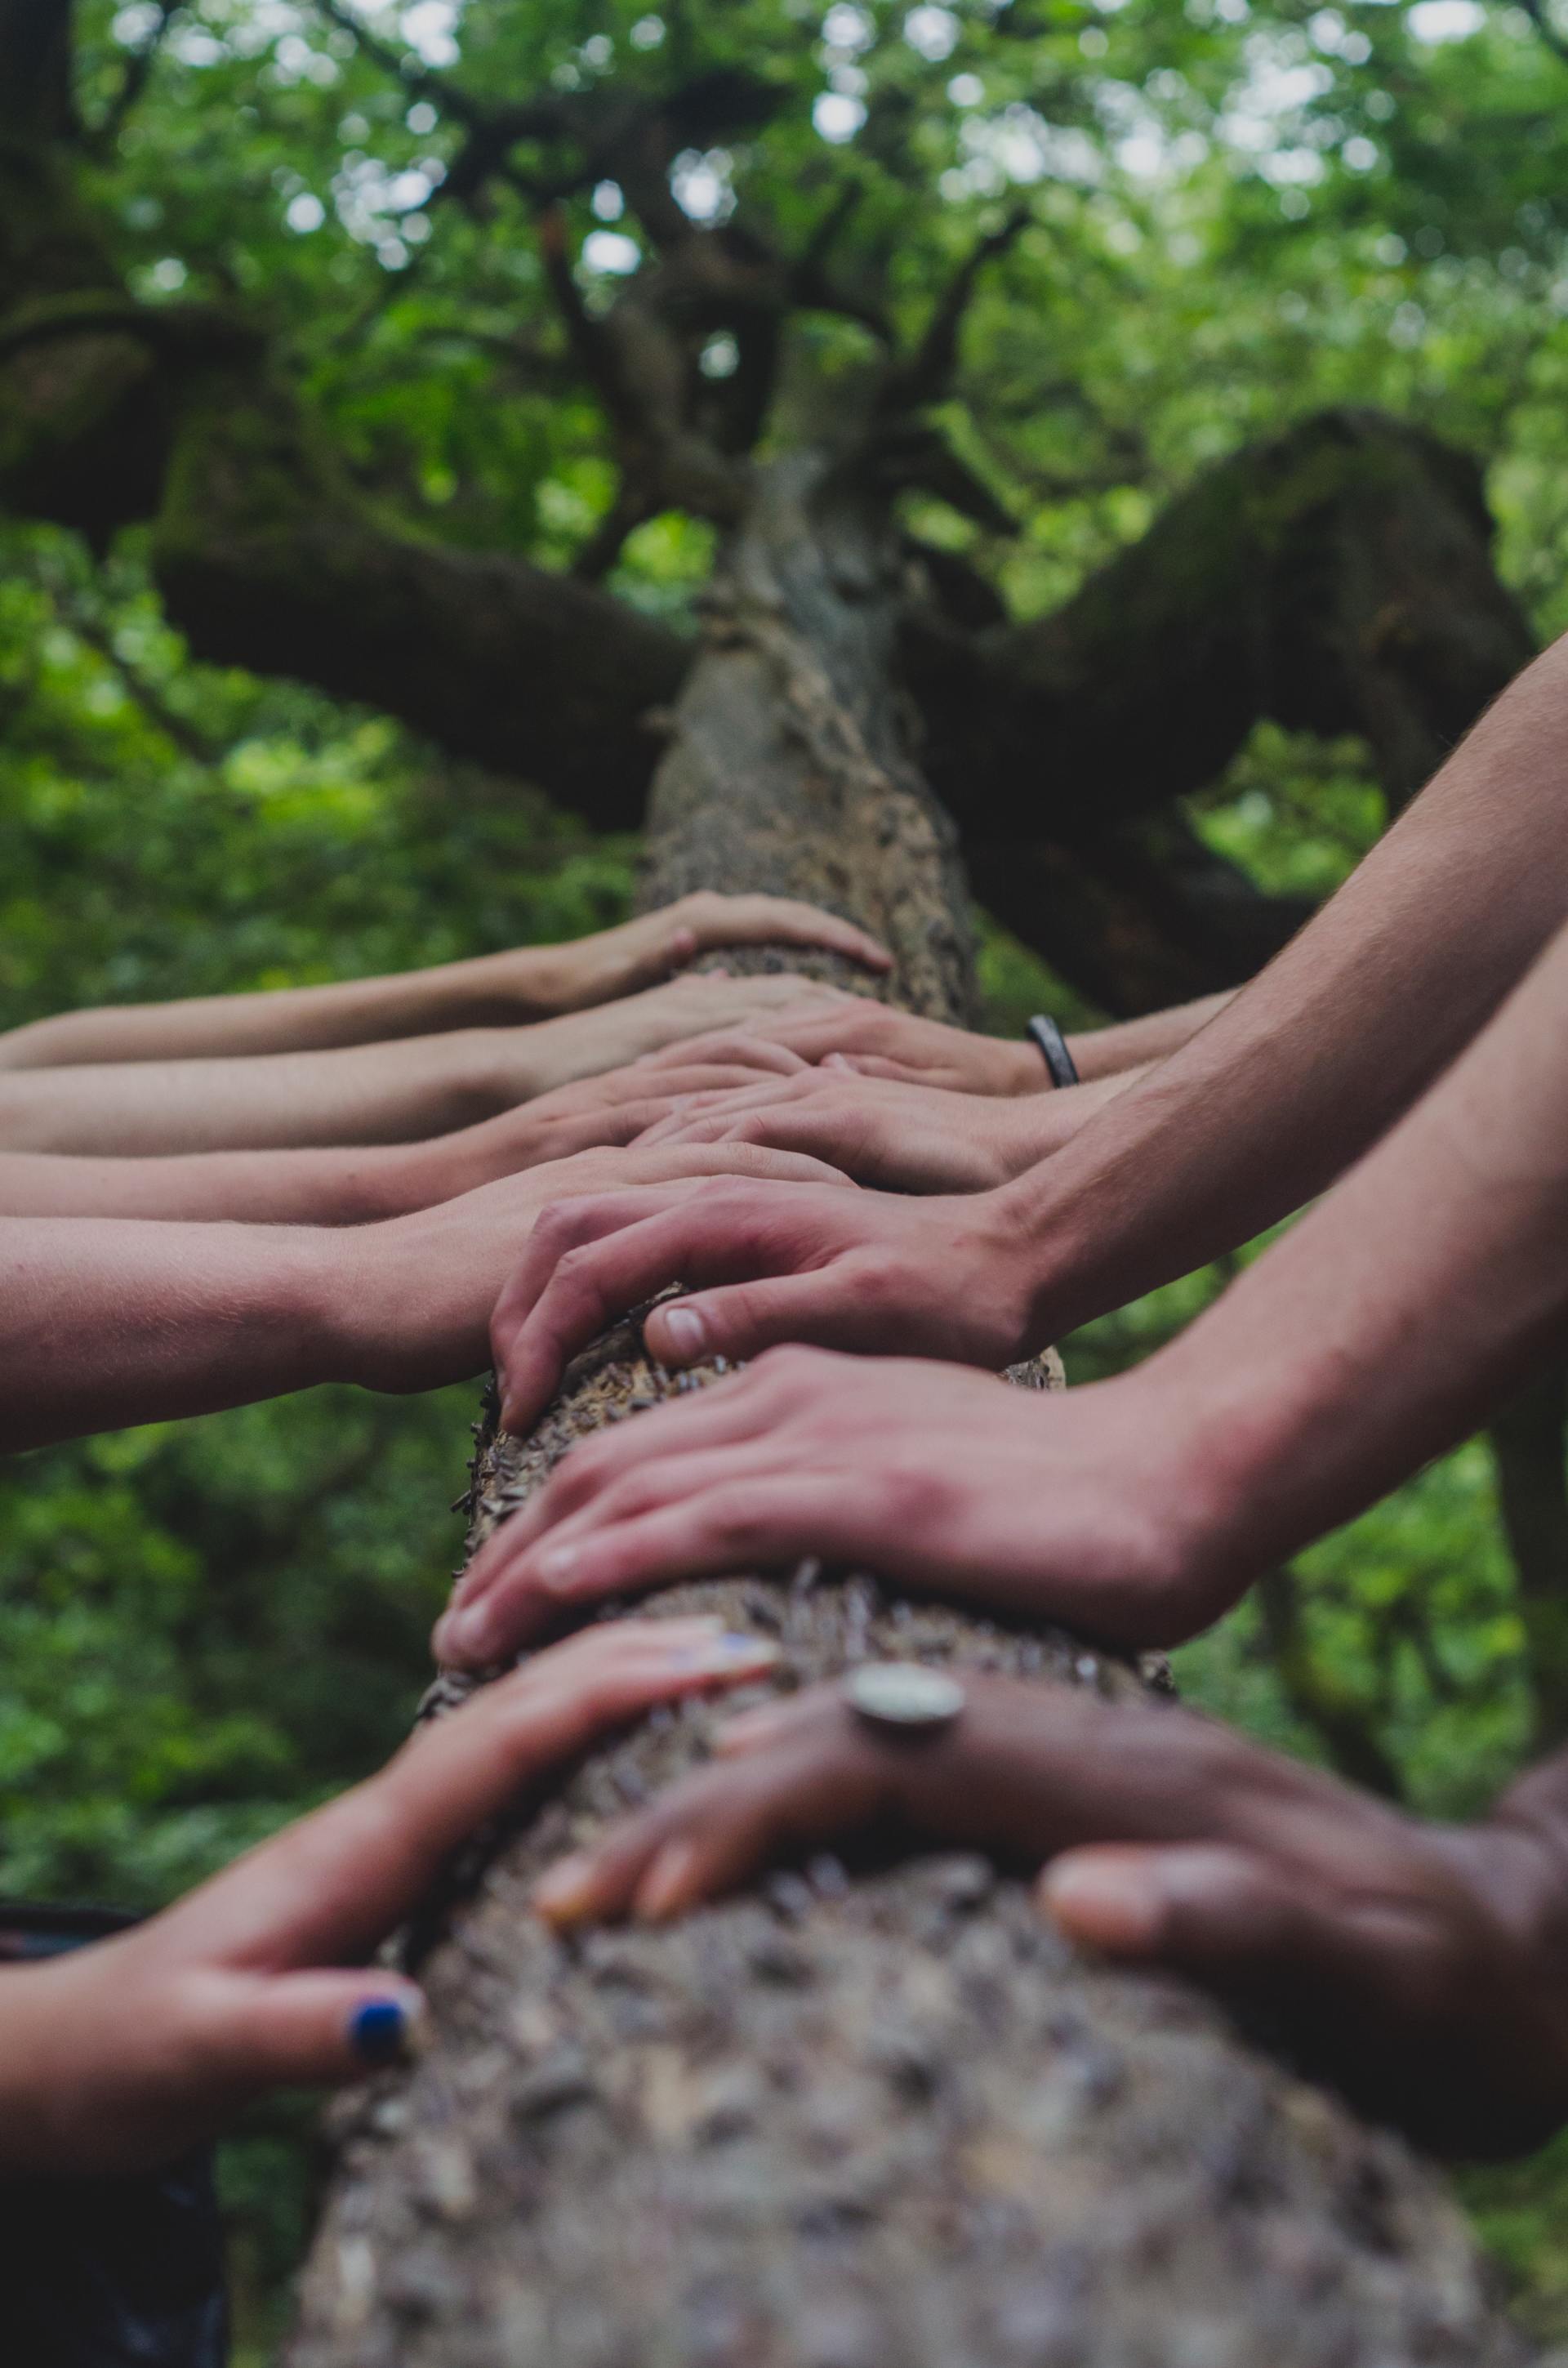 Lots of hands lined up next to each other on a log